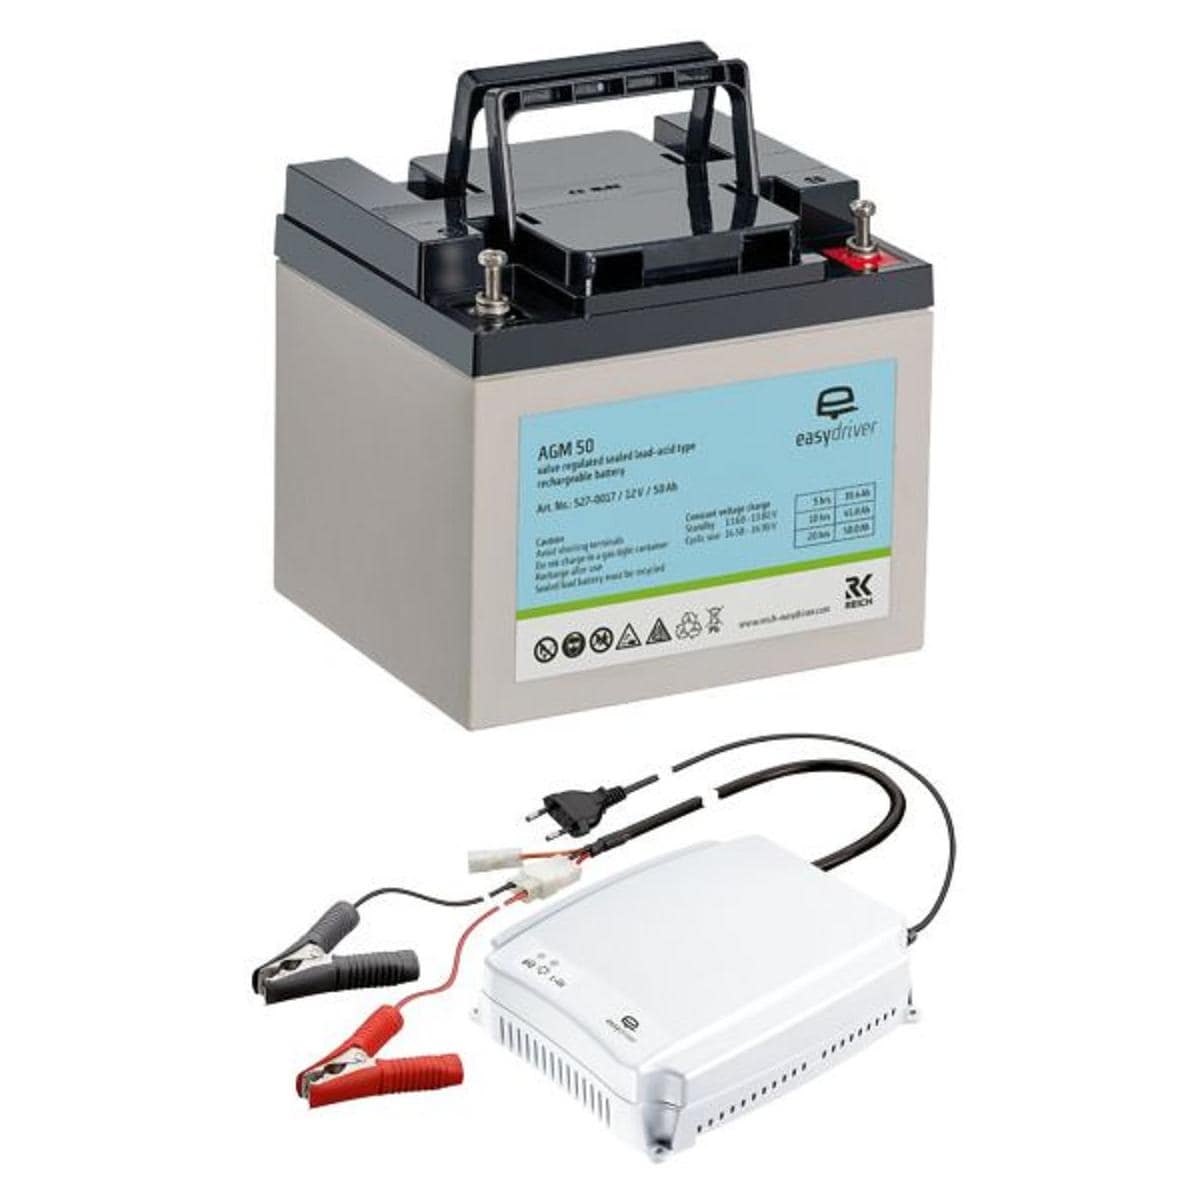 Easydriver Energie-Paket M, AGM-Batterie und Ladegerät bei Camping